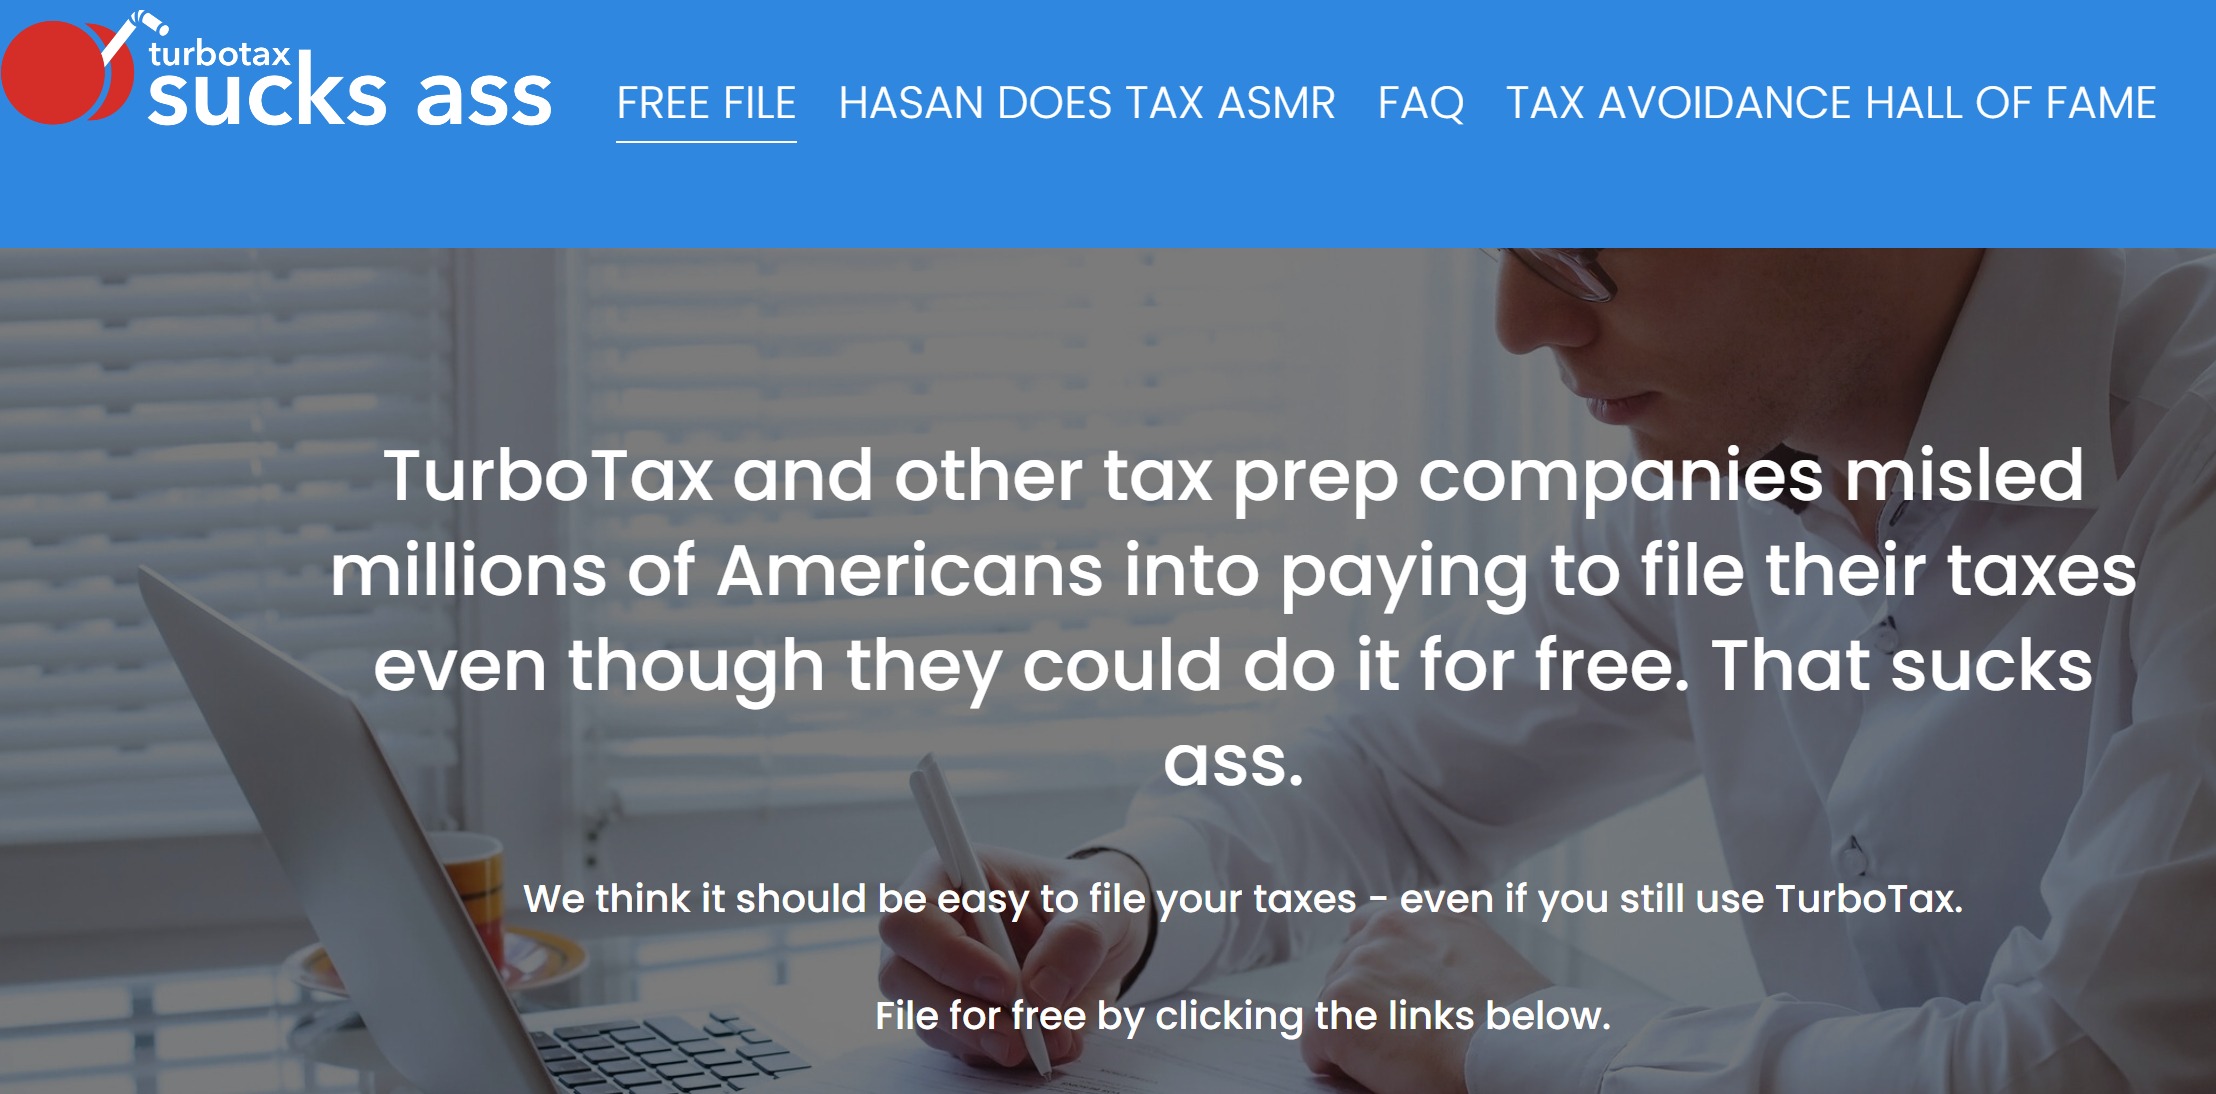 presentation - turbotax sucks ass Free File Hasan Does Tax Asmr Faq Tax Avoidance Hall Of Fame TurboTax and other tax prep companies misled millions of Americans into paying to file their taxes even though they could do it for free. That sucks ass. We thi